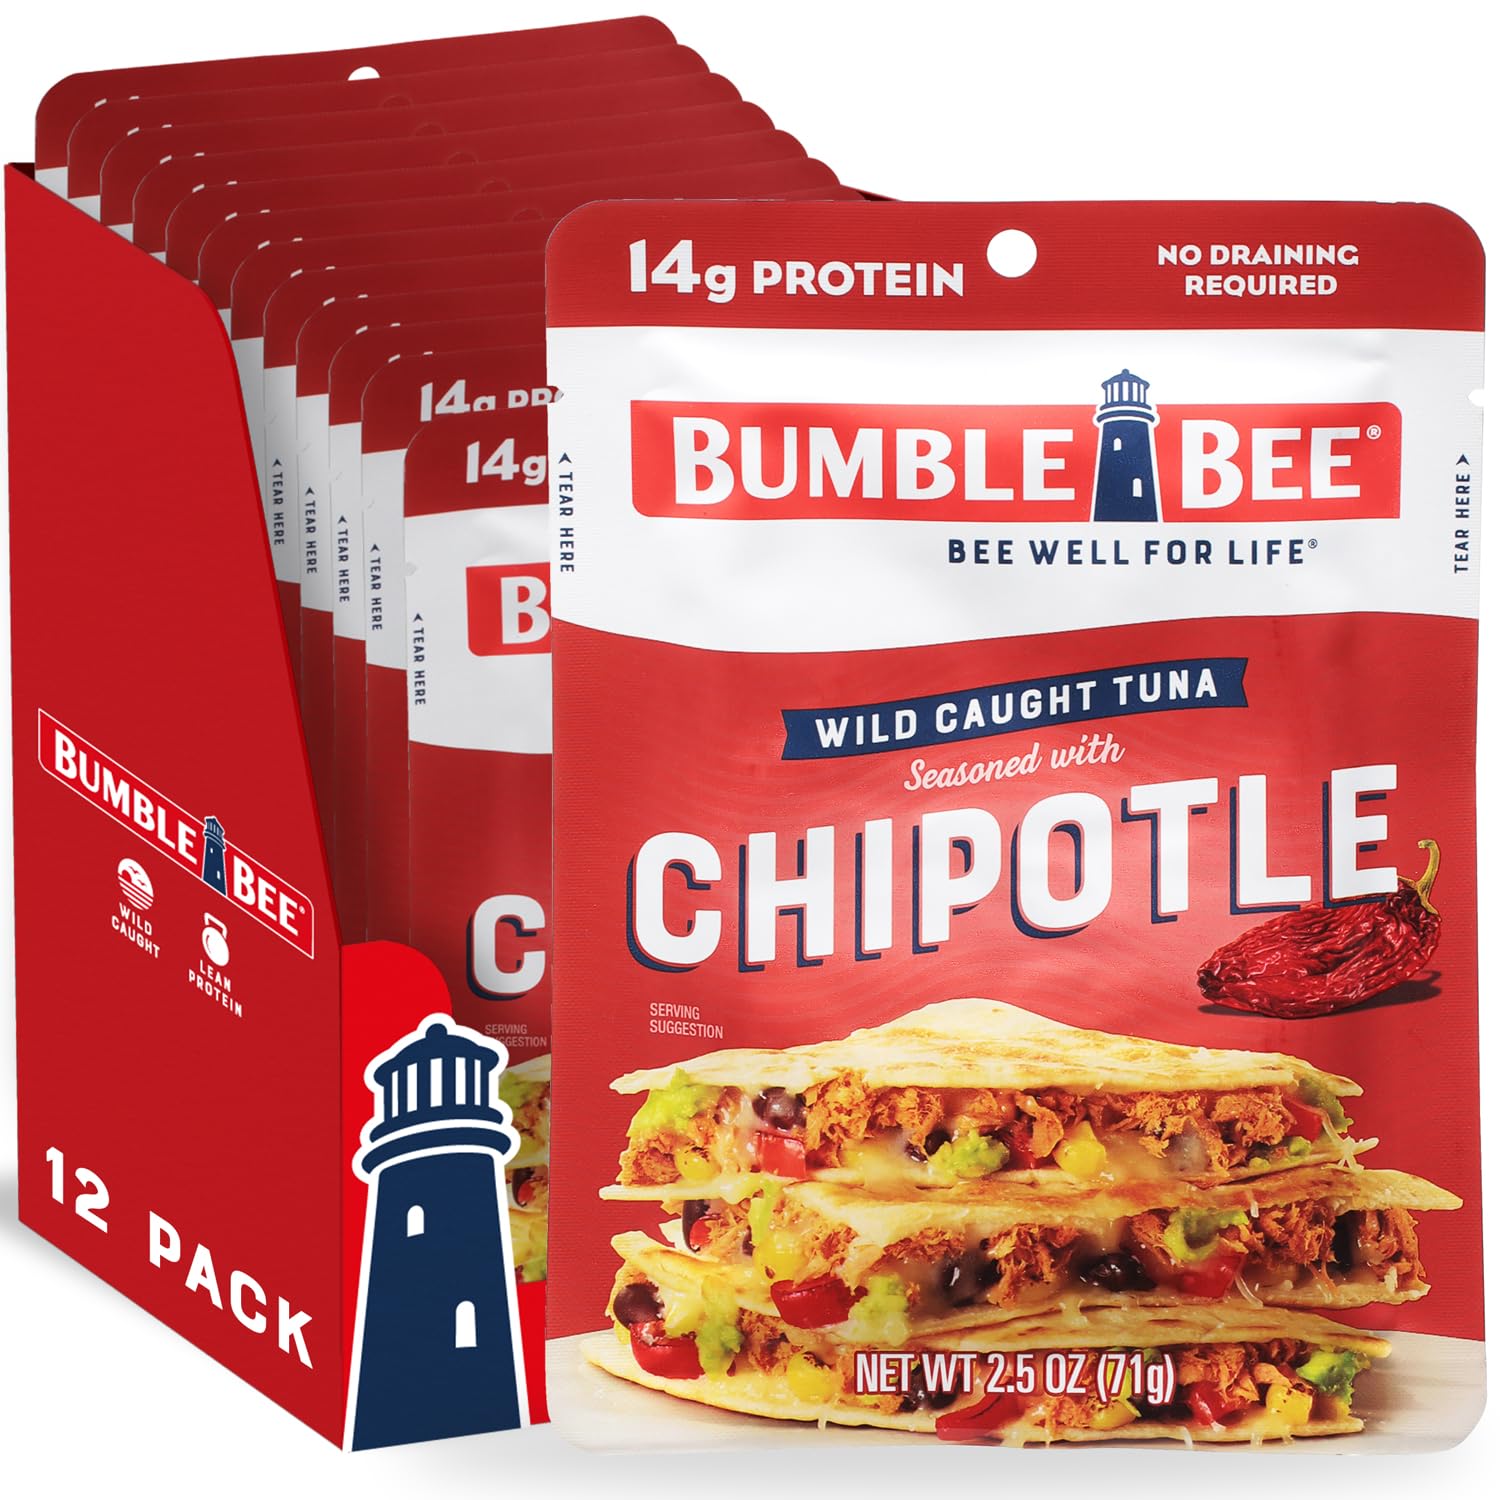 12-Count 2.5-Oz Bumble Bee Premium Wild Caught Tuna Pouch: Chipotle, Spicy Thai, Lemon Sesame & Ginger $7.20 & More w/S&S + Free Shipping w/ Prime or on $35+